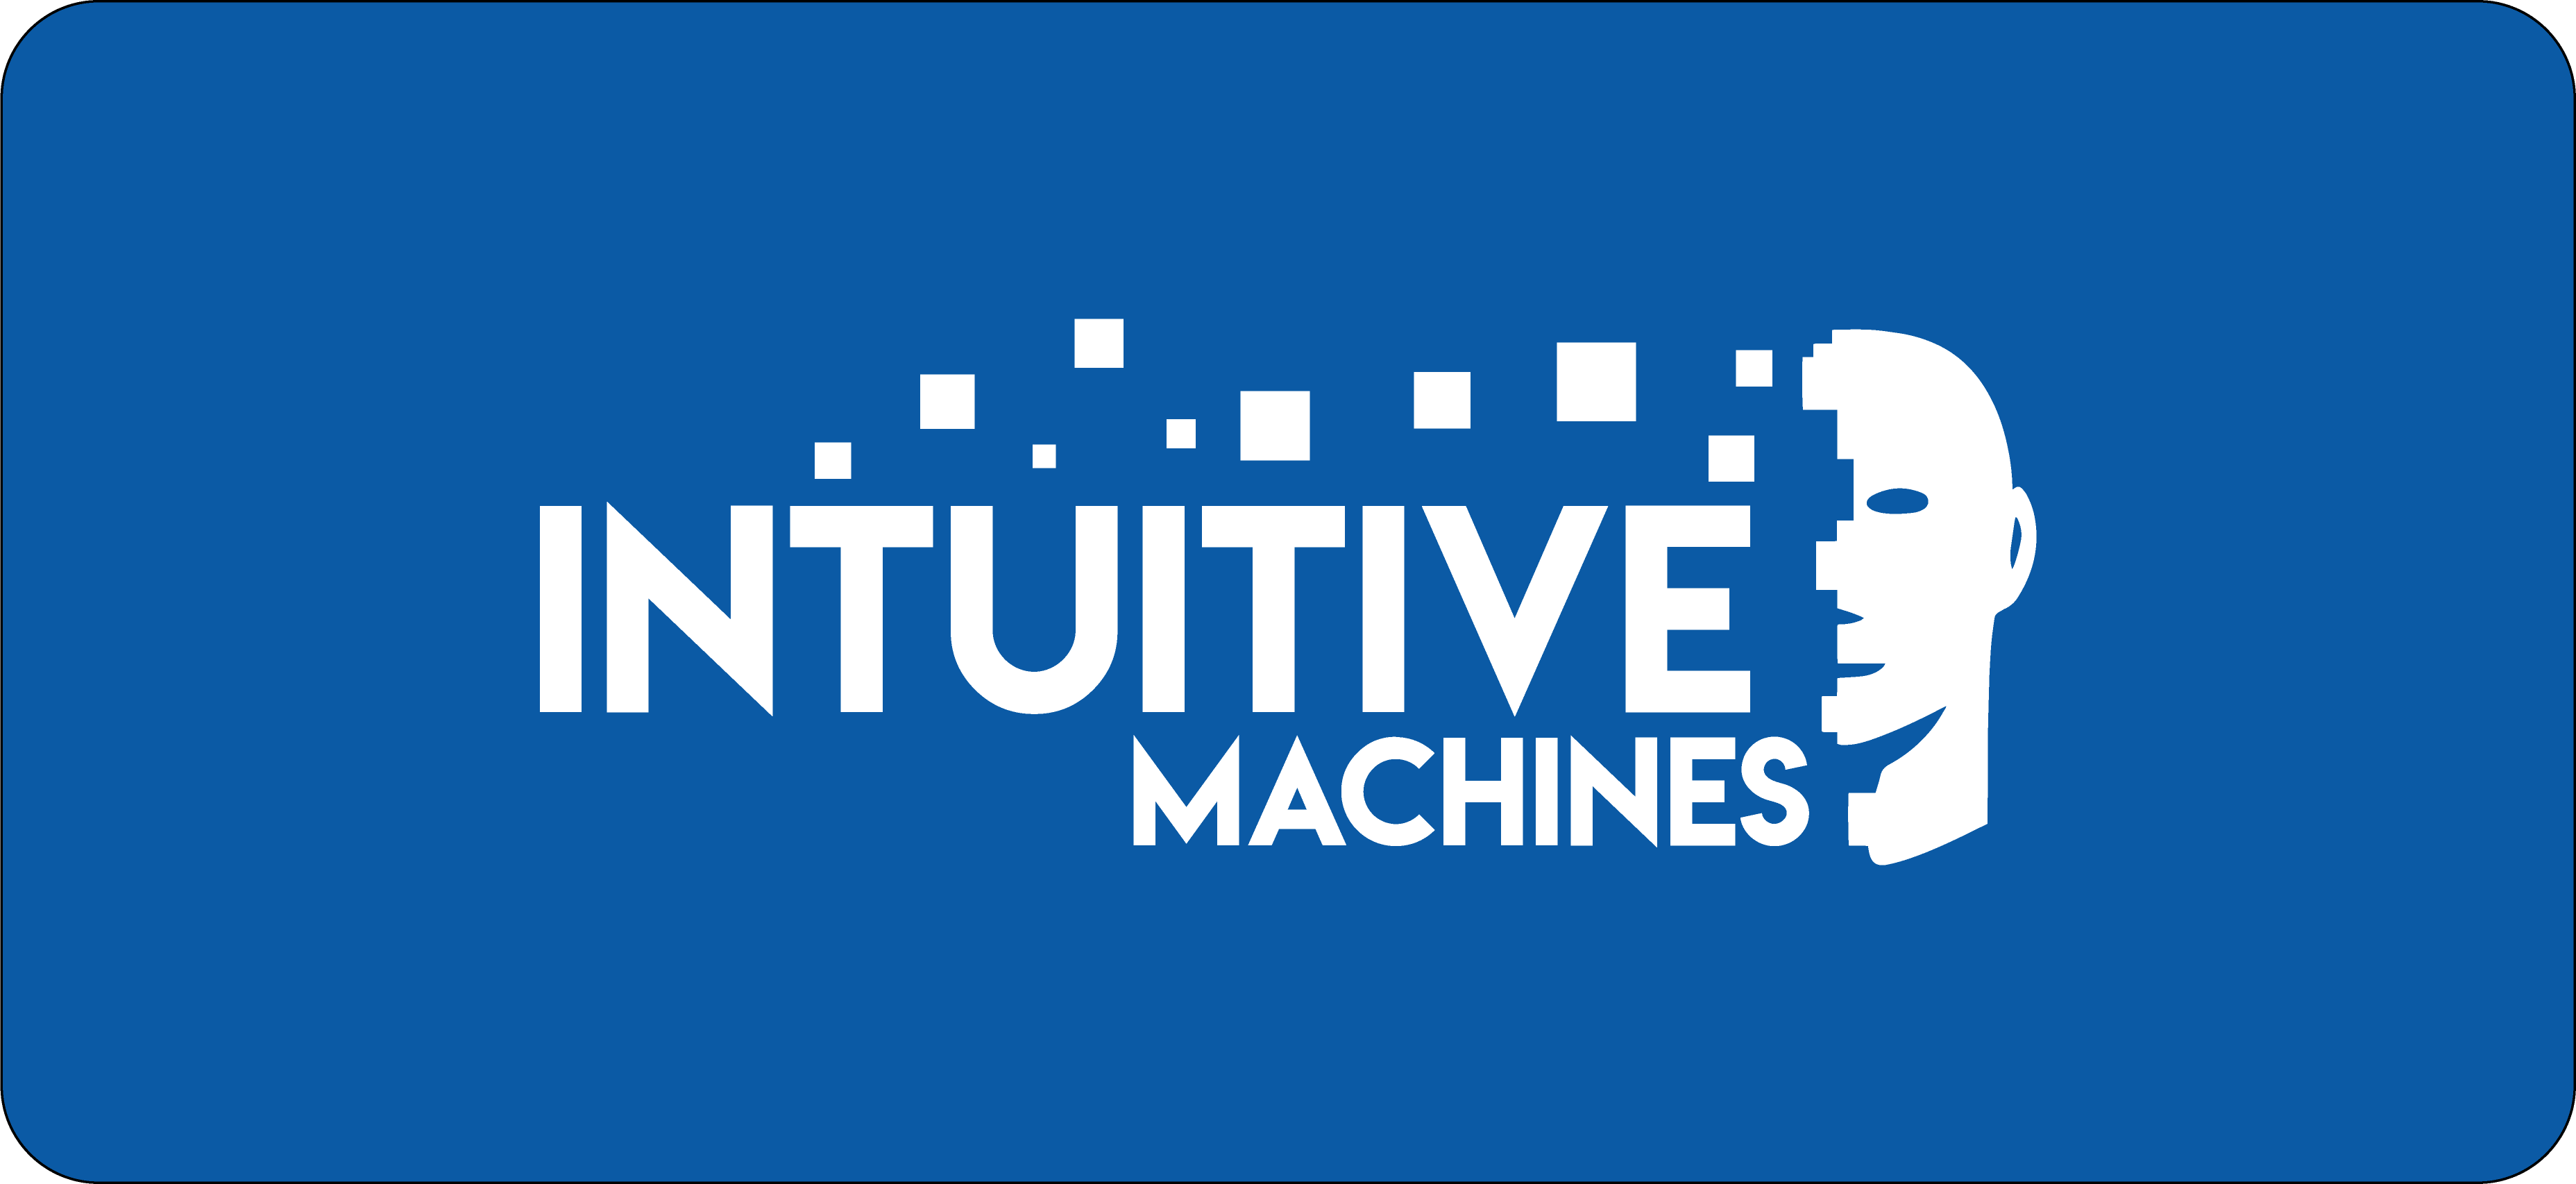 The logo of Intuitive Machines.